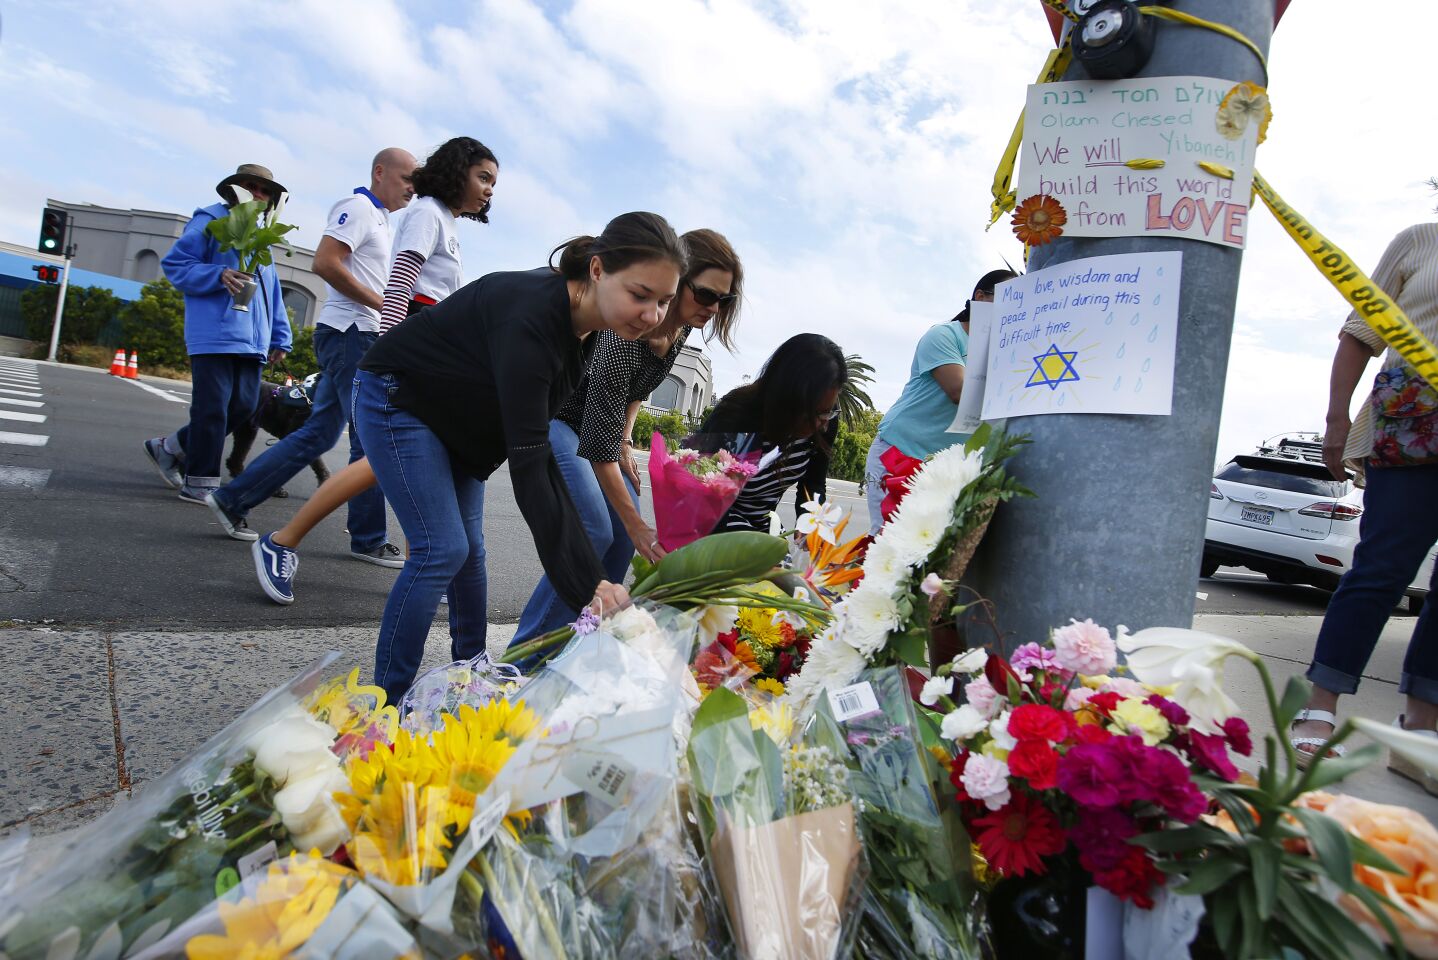 Poway residents leave flowers at a memorial across the street from the Chabad of Poway, where a shooting took place the day before on April 28, 2019 in Poway, California. (Photo by K.C. Alfred/The San Diego Union-Tribune)